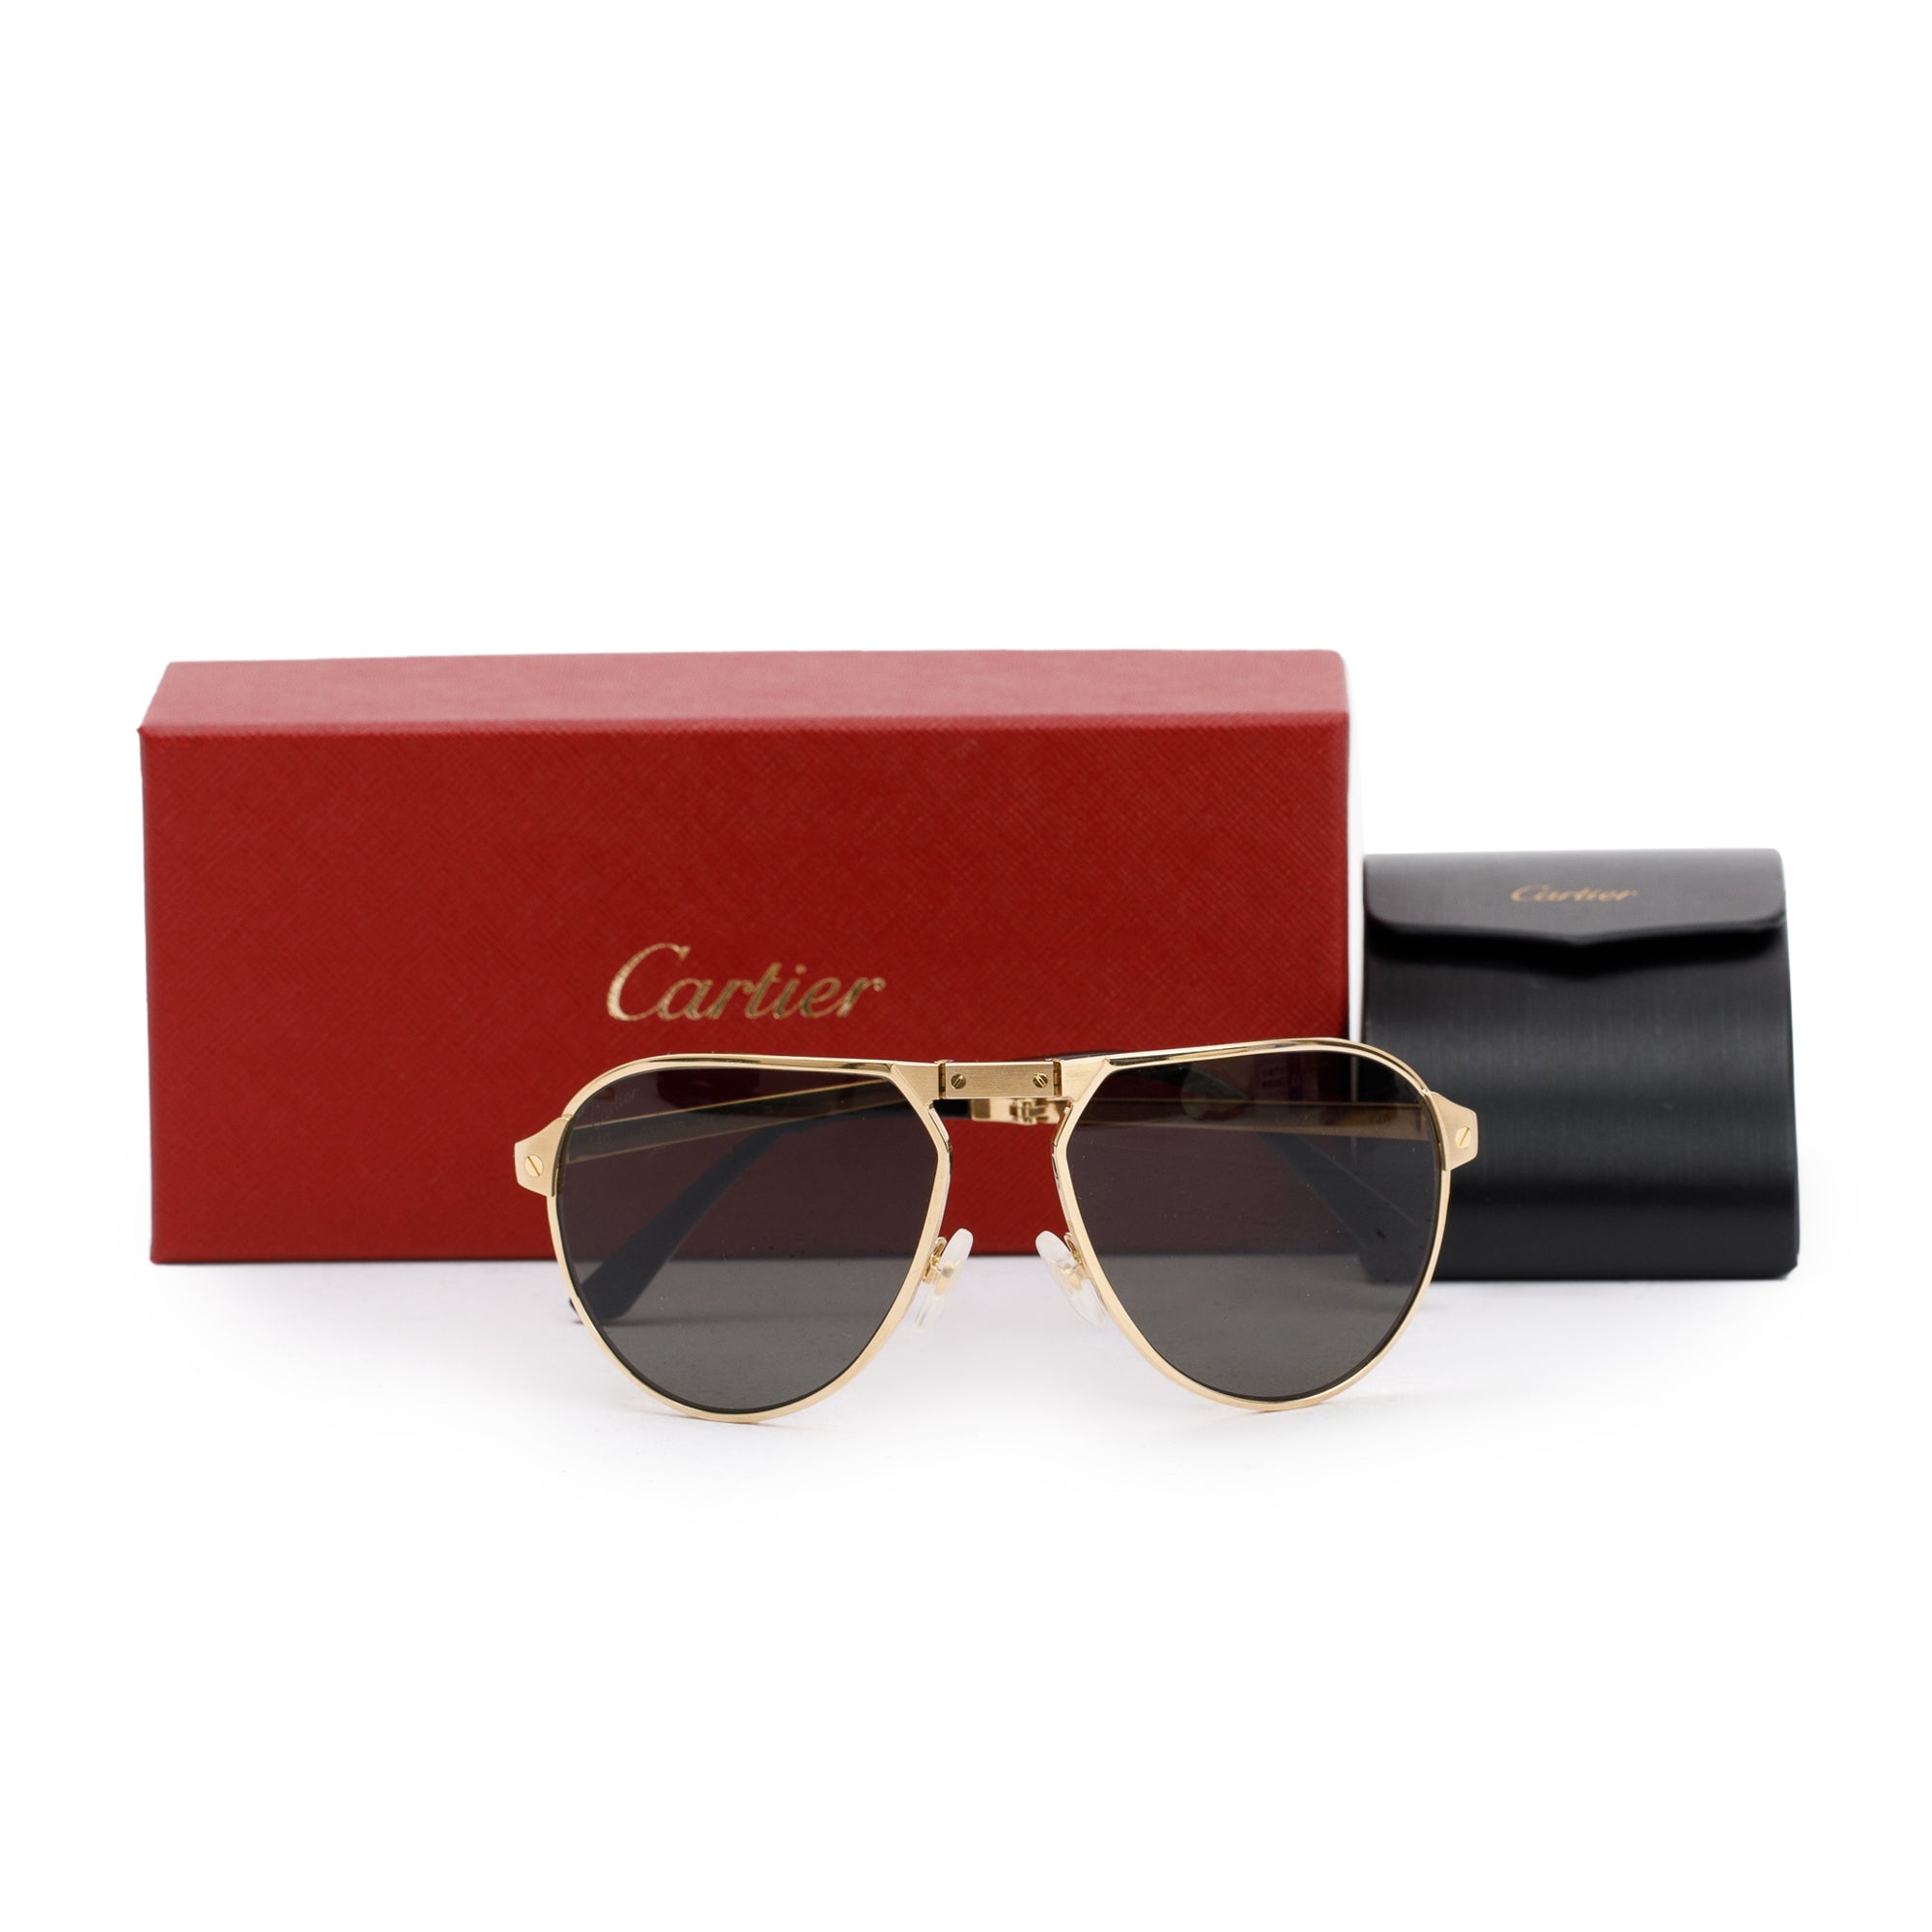 VINTAGE CARTIER PANTHER Sunglasses-Beautiful Condition With Box $500.00 -  PicClick